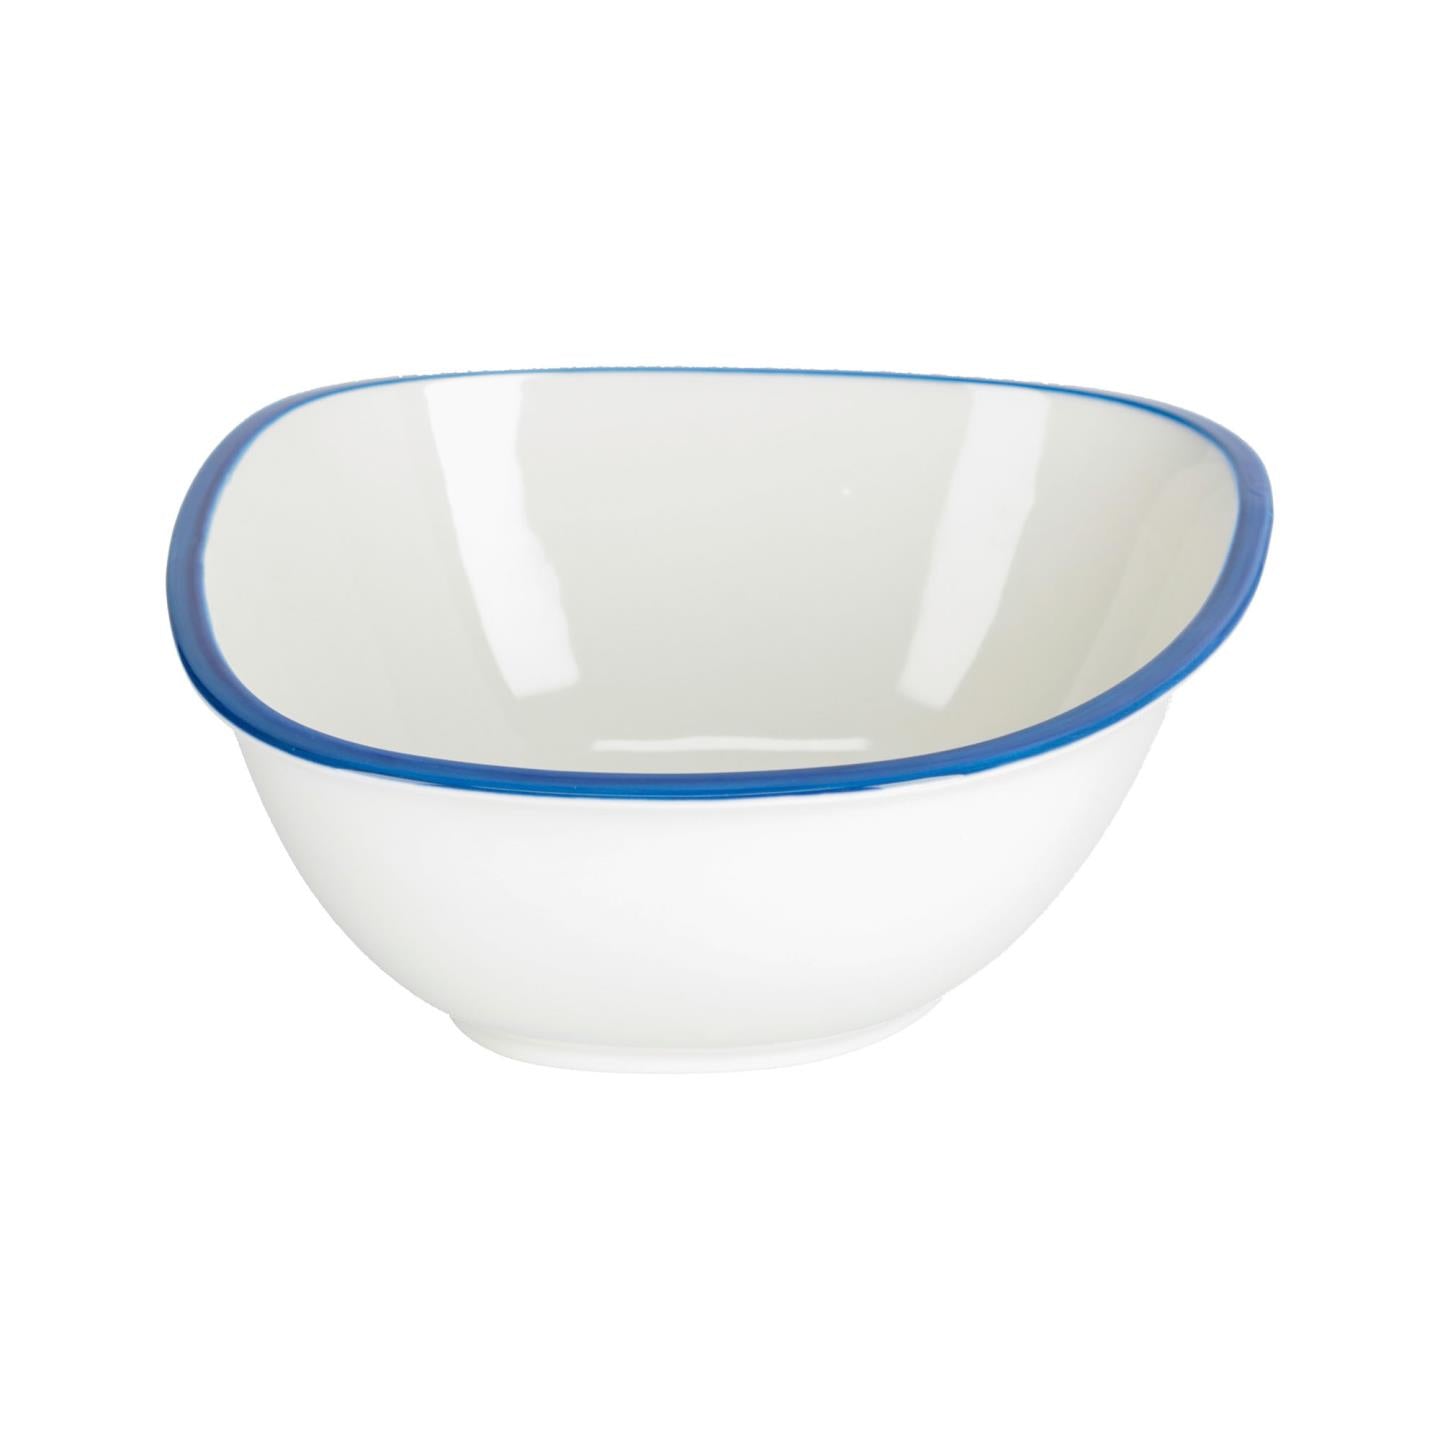 Odalin large blue and white porcelain bowl